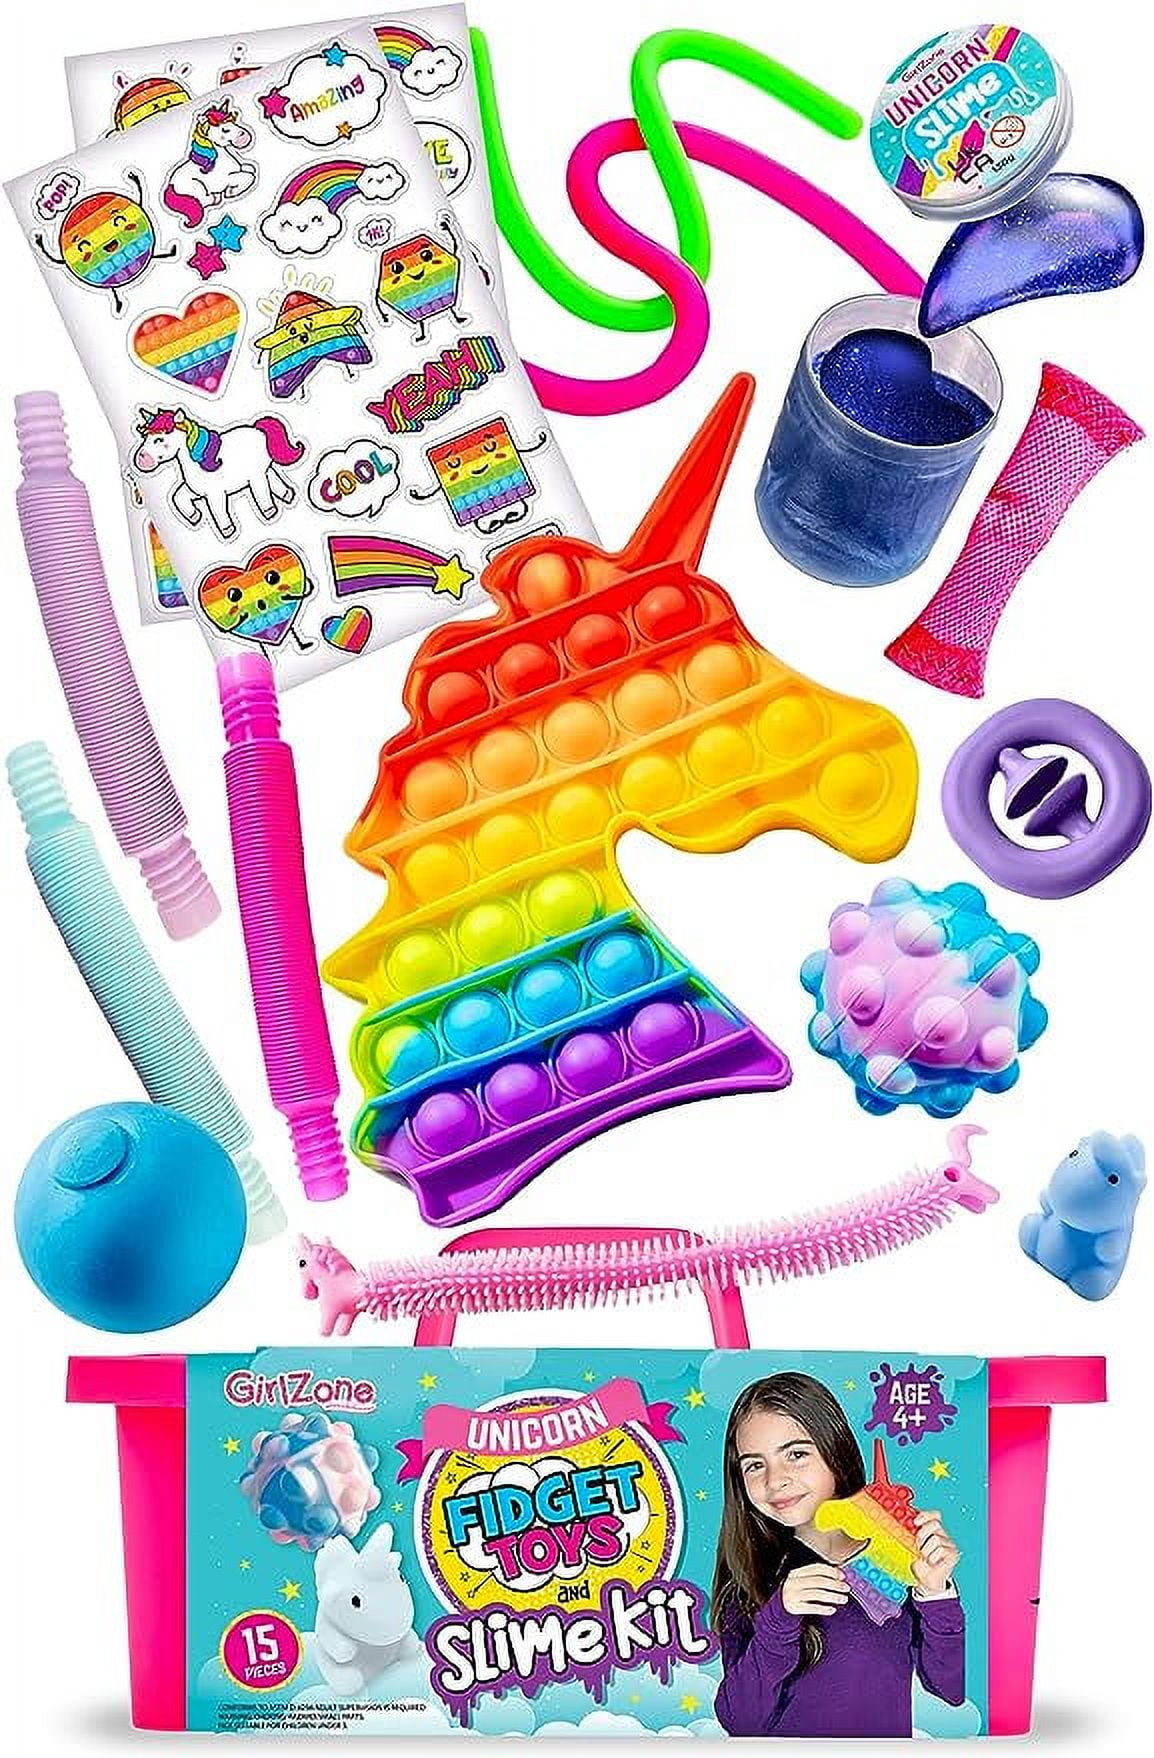 GirlZone Unicorn Egg Sparkly Surprise Slime Kit for Kids, Create Cloud  Slime and Magical Unicorn Slime for Kids, Fun Christmas Gifts for Girls 8-12